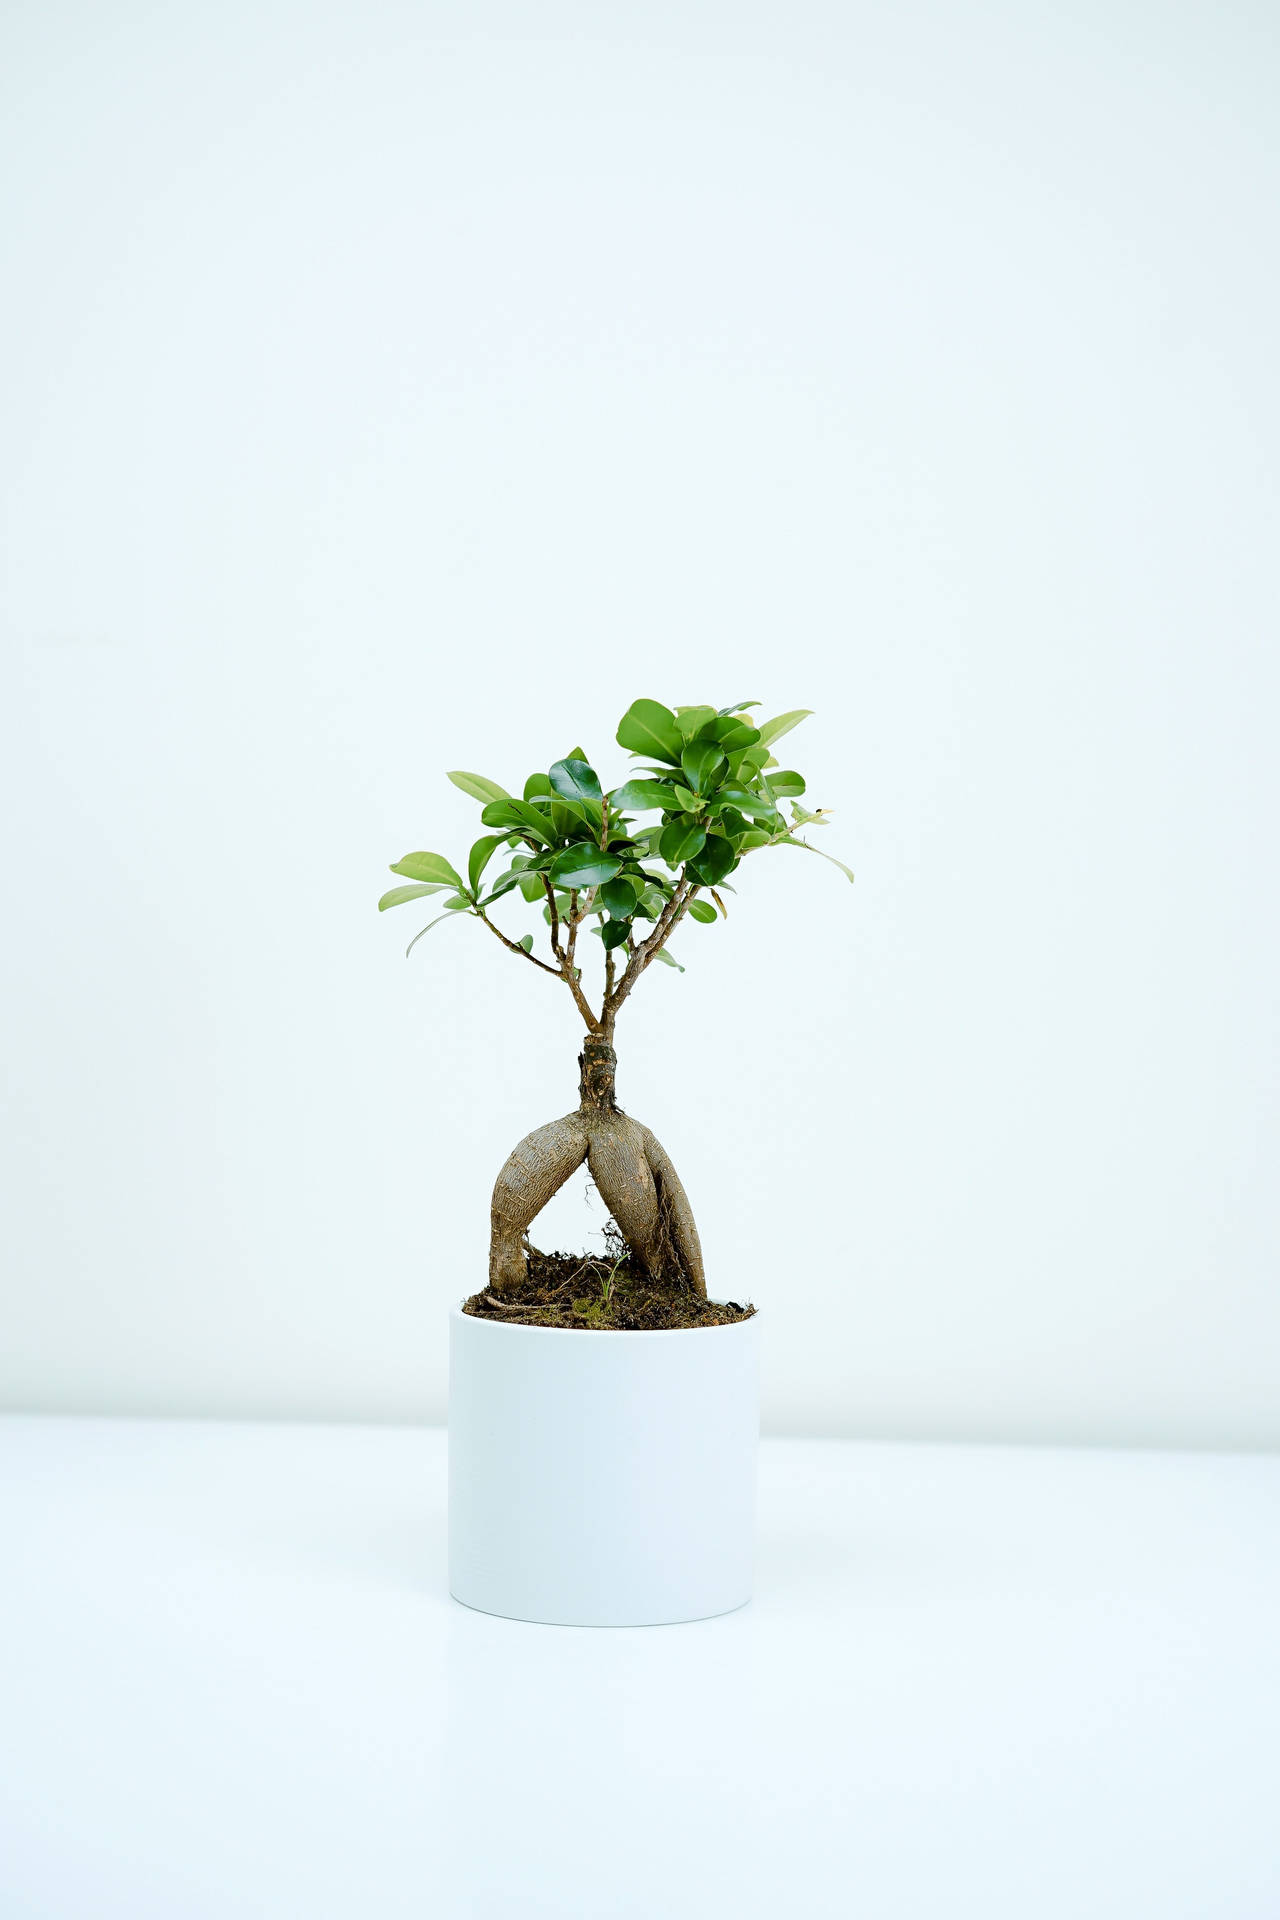 Bonsai Tree Exposed Root Style Photography Wallpaper